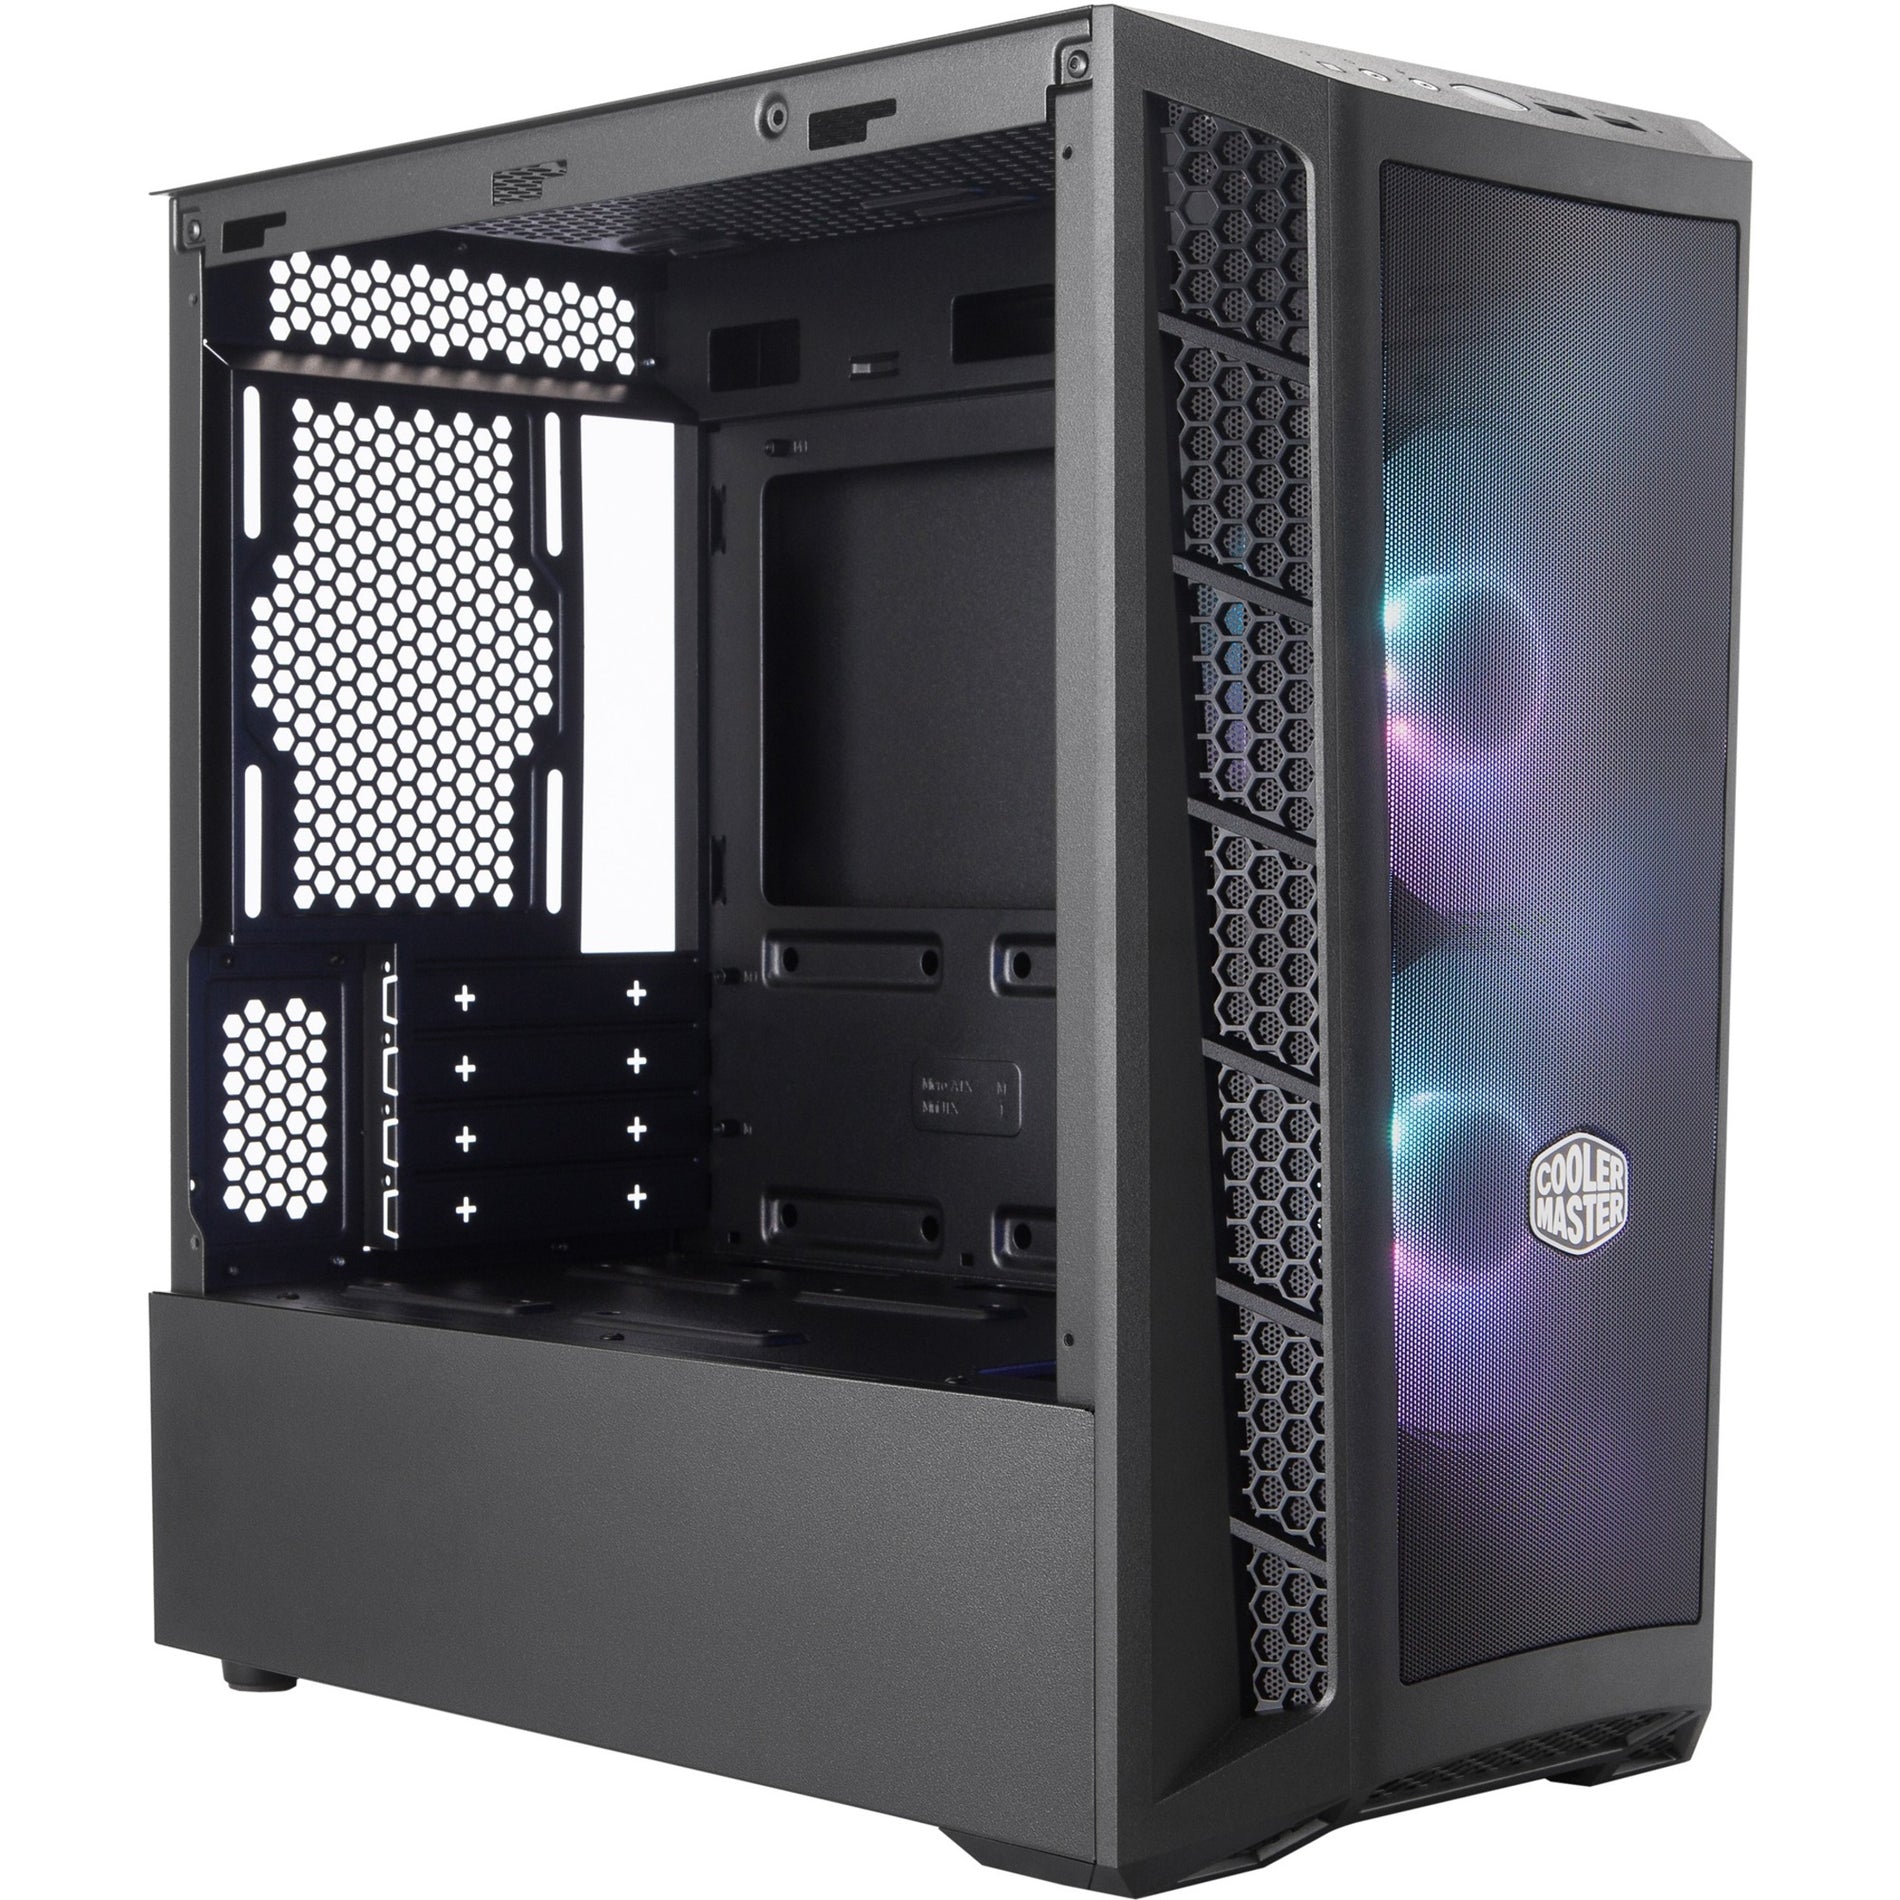 Cooler Master MCB-B311L-KGNN-S02 MasterBox MB311L ARGB Computer Case, Compact Mini-tower with Tempered Glass, Black